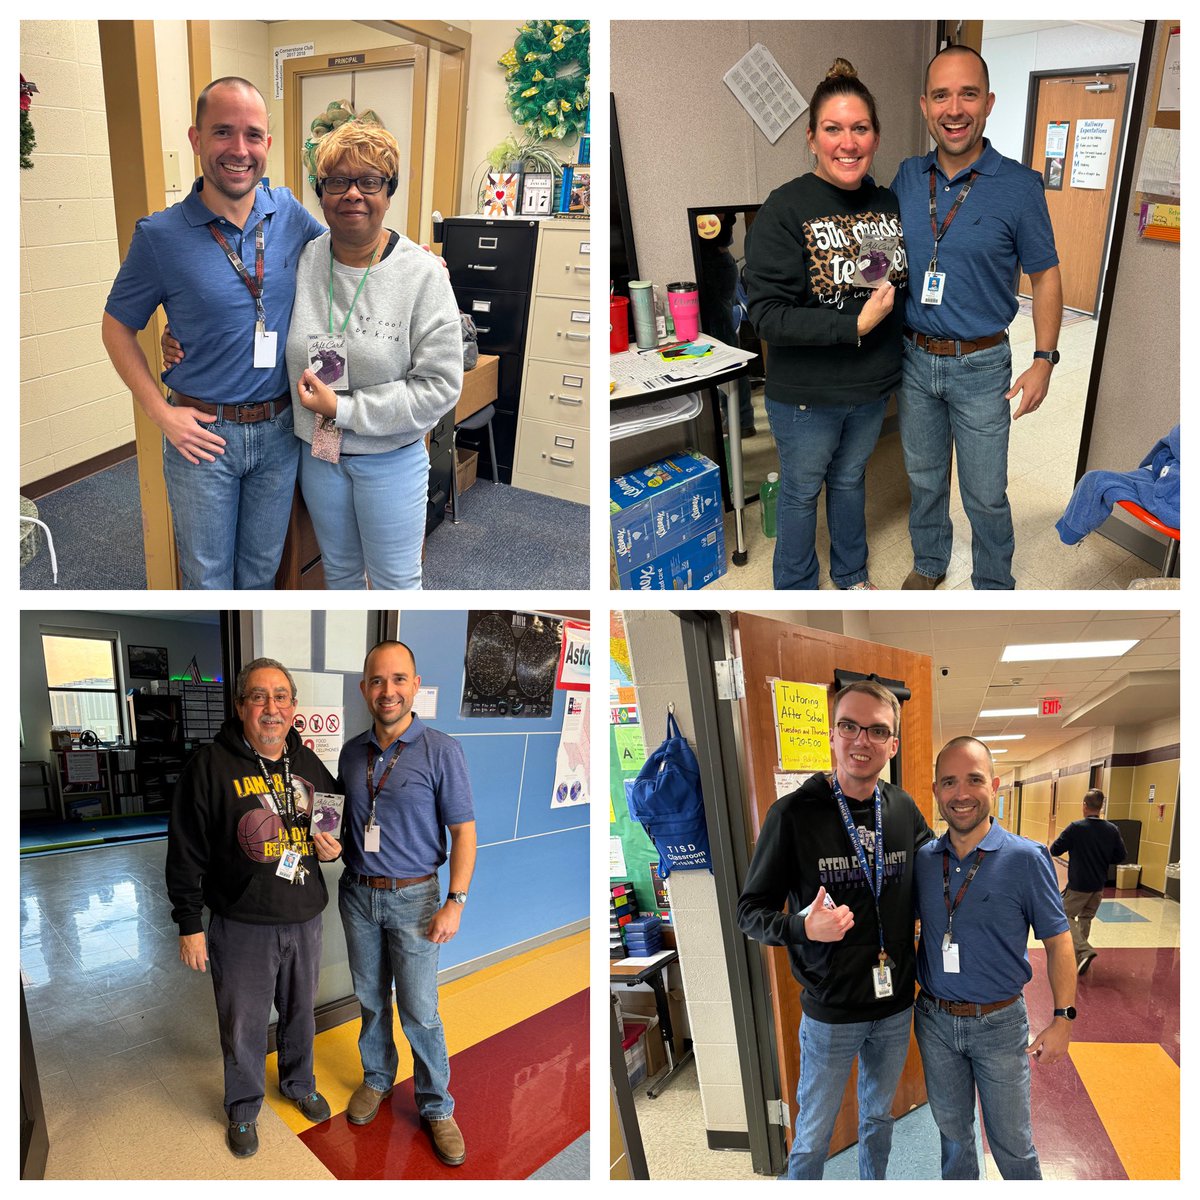 Congratulations to Avonda Talley (Cater), Cheryl Lawton (Raye Allen), Samuel Padilla and Gehrig Rock (Lamar) on winning the Cybersecurity Gift cards!!!